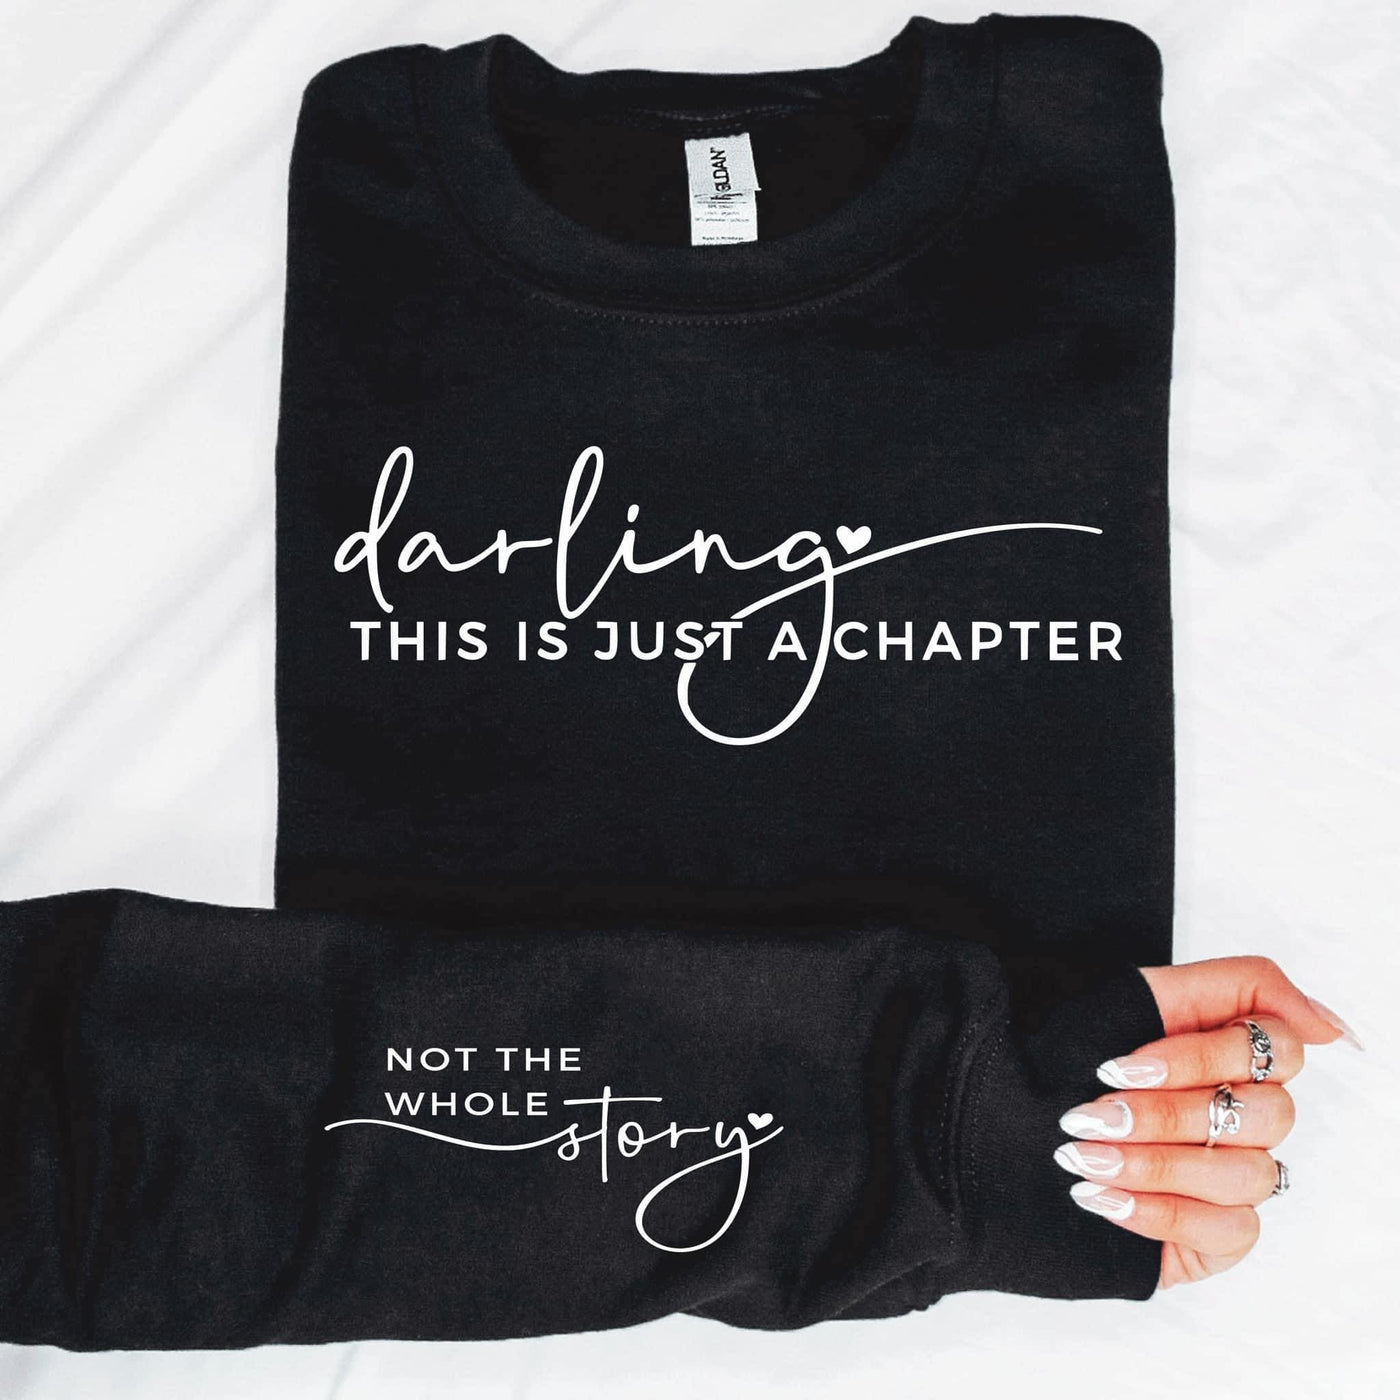 Darling This Is Just A Chapter w/Sleeve Accent Sweatshirt